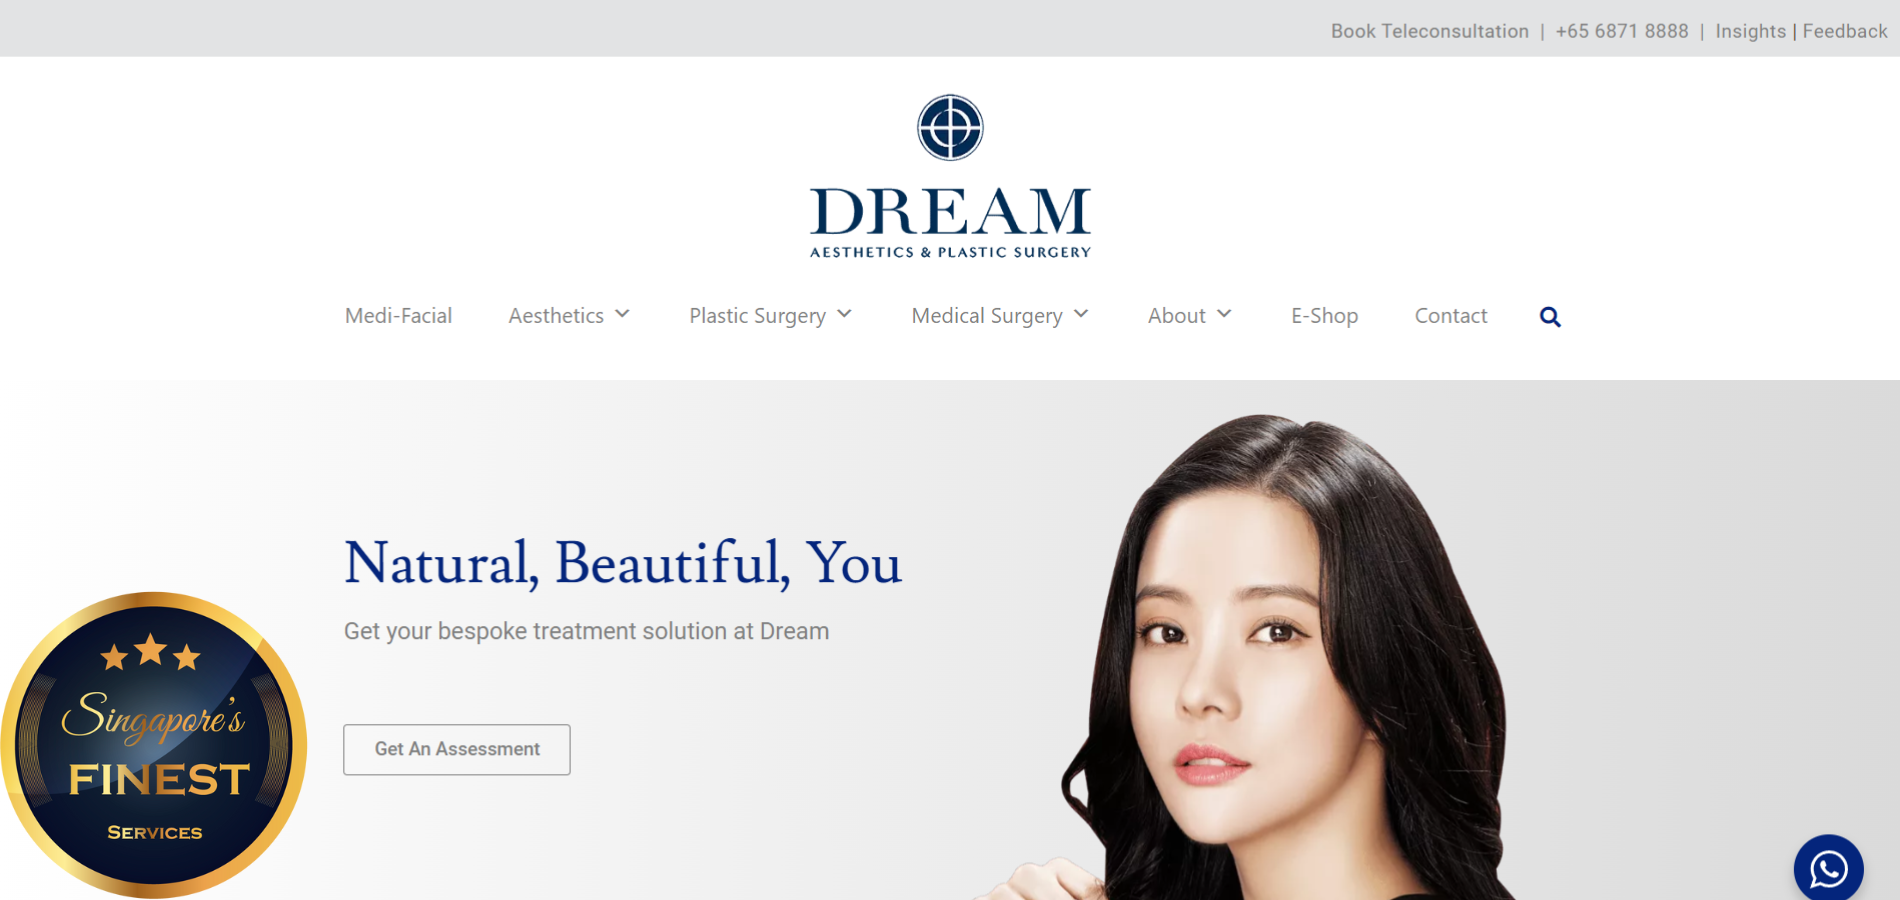 The Finest Double Eyelid Surgery Clinics in Singapore